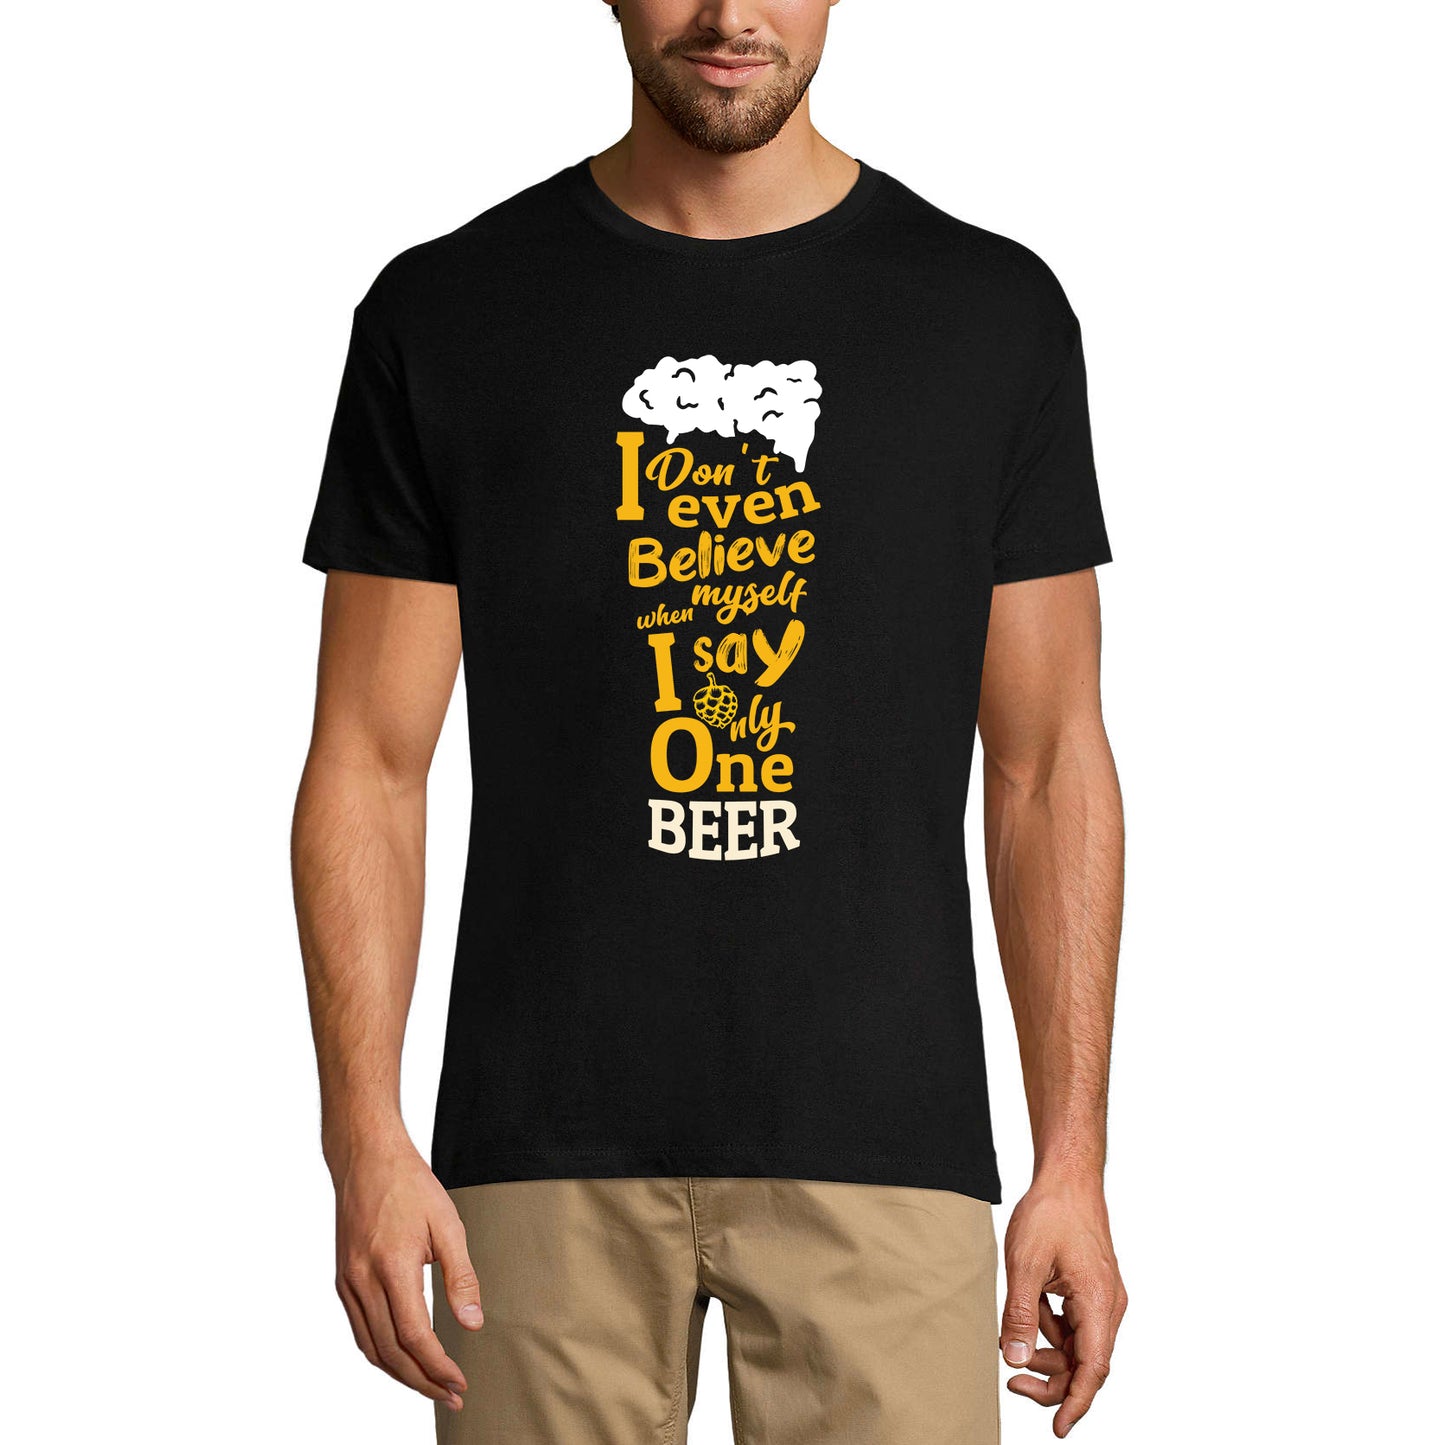 ULTRABASIC Men's T-Shirt I Don't Even Believe Myself When I Say Only One Beer - Beer Lover Tee Shirt